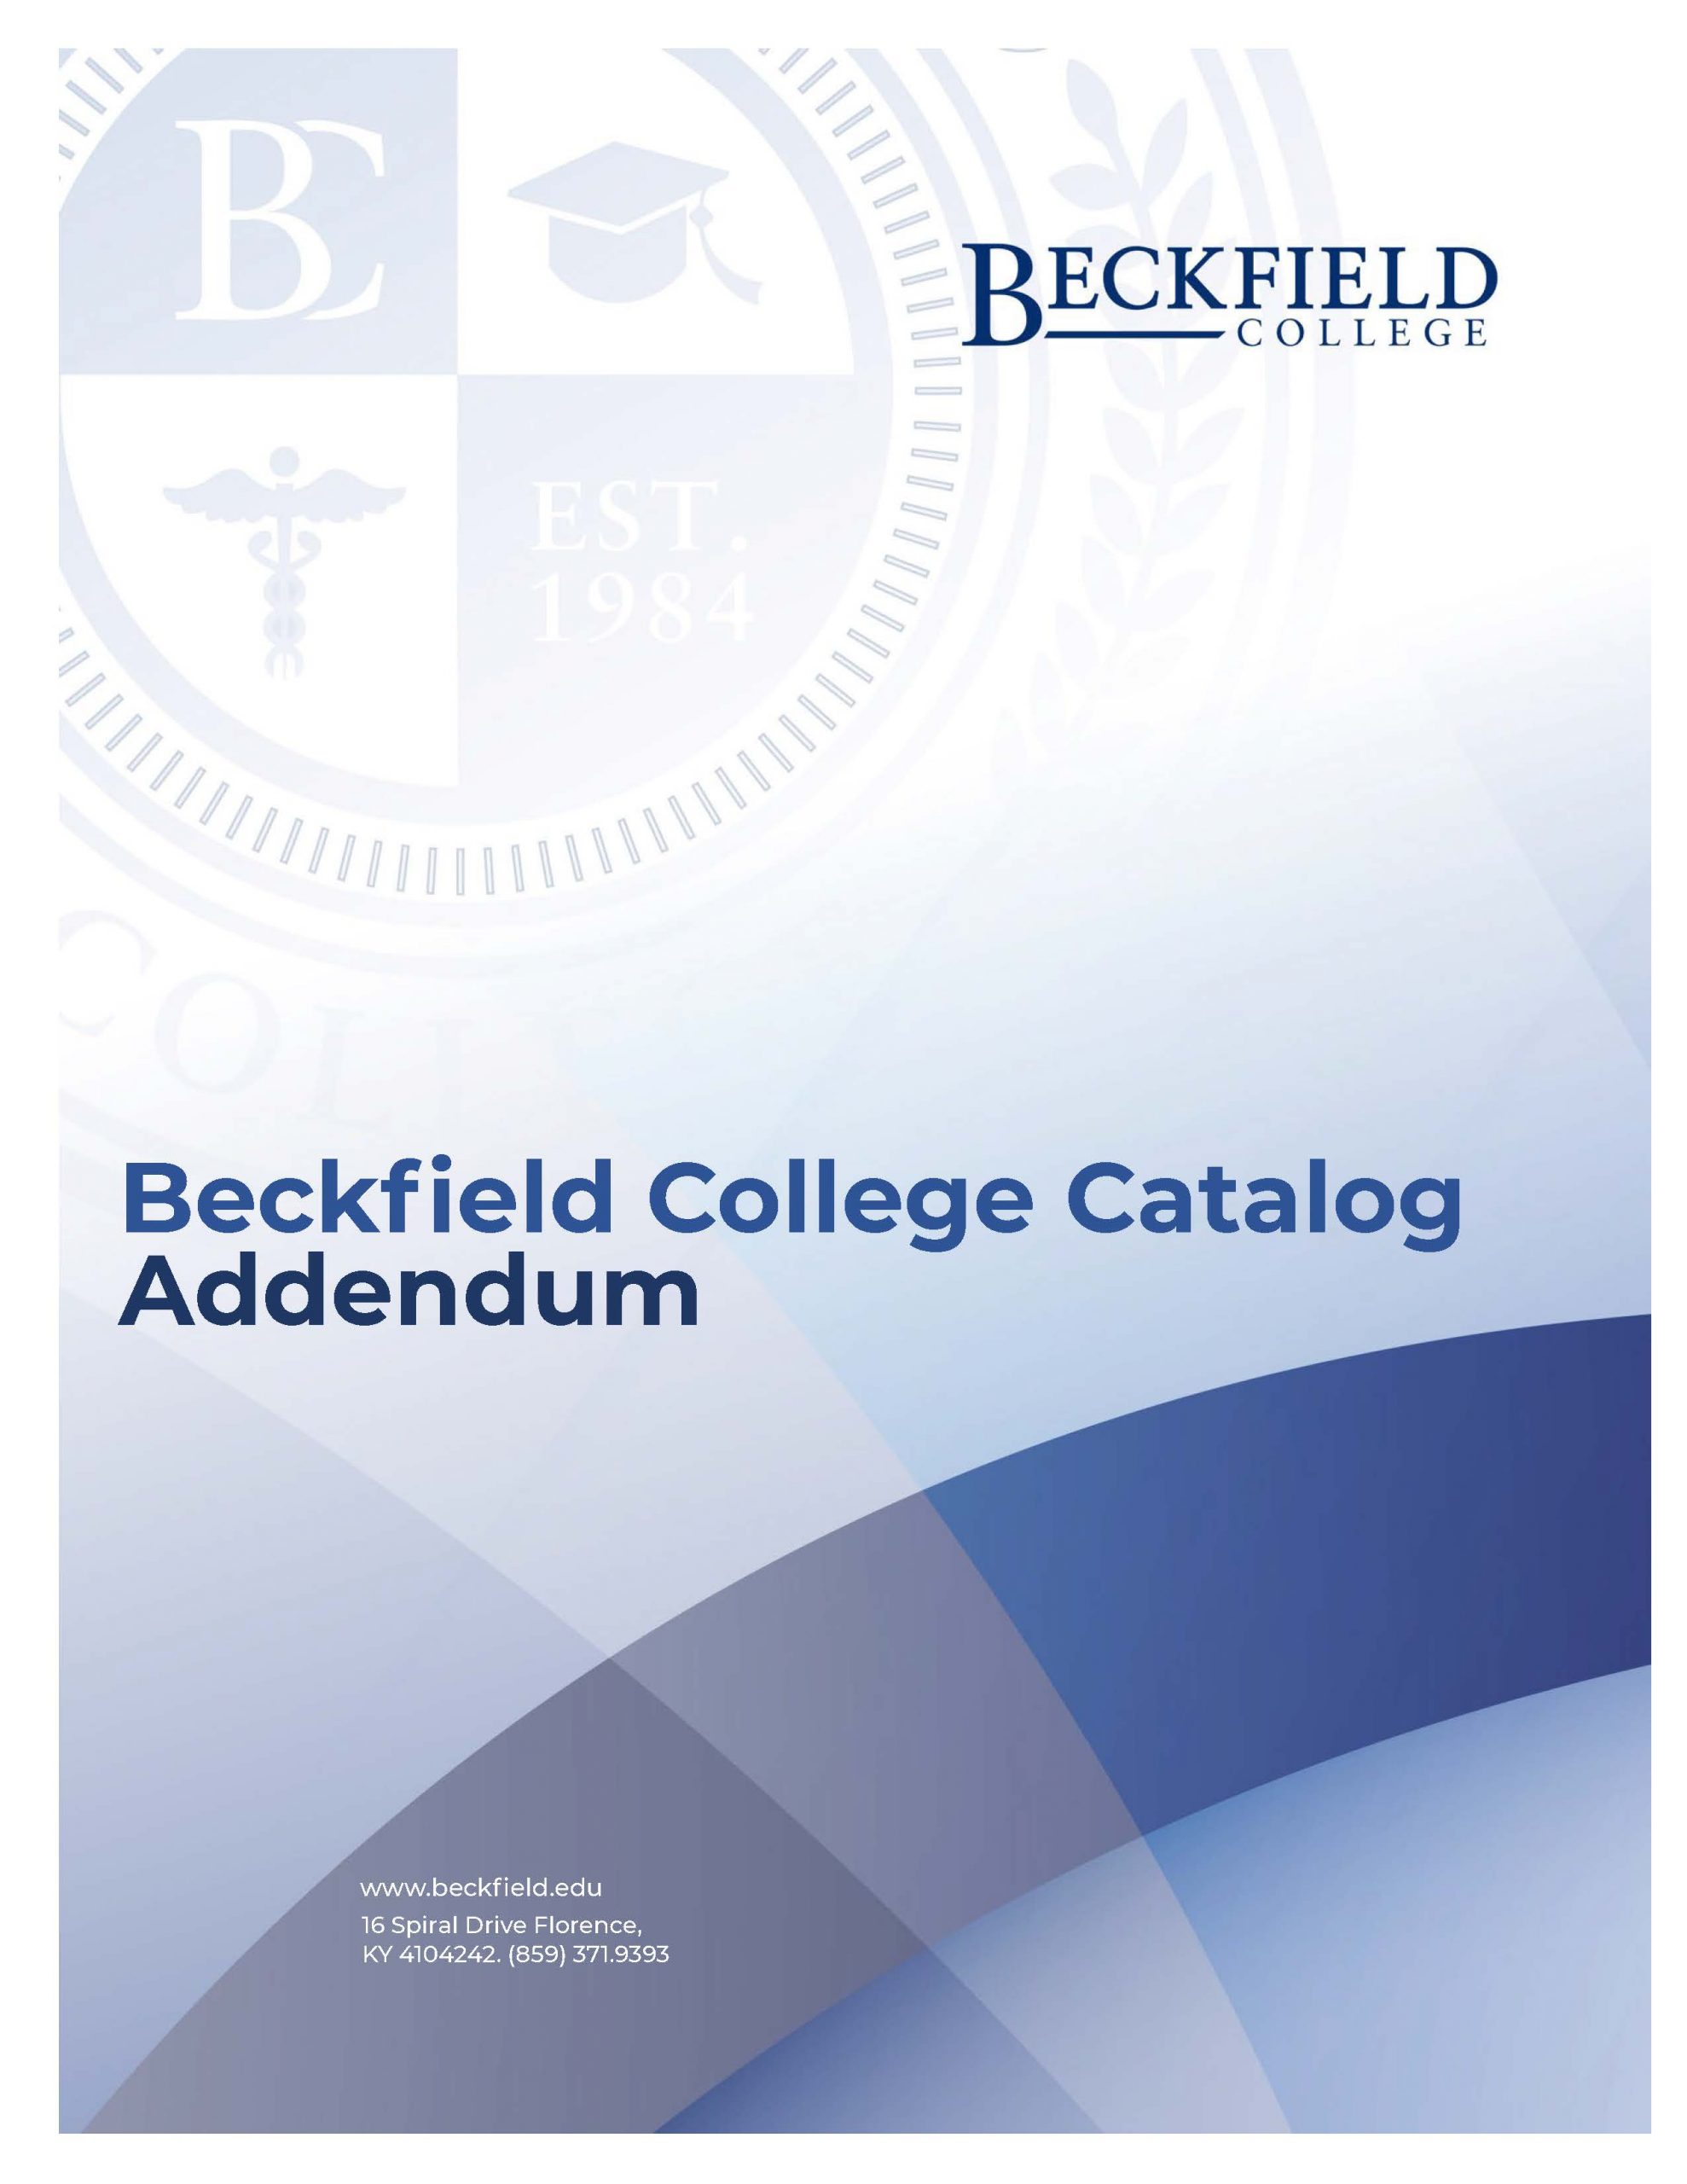 Image of the Beckfield College Catalog Addendum document cover. Click to access more details on academic policies.